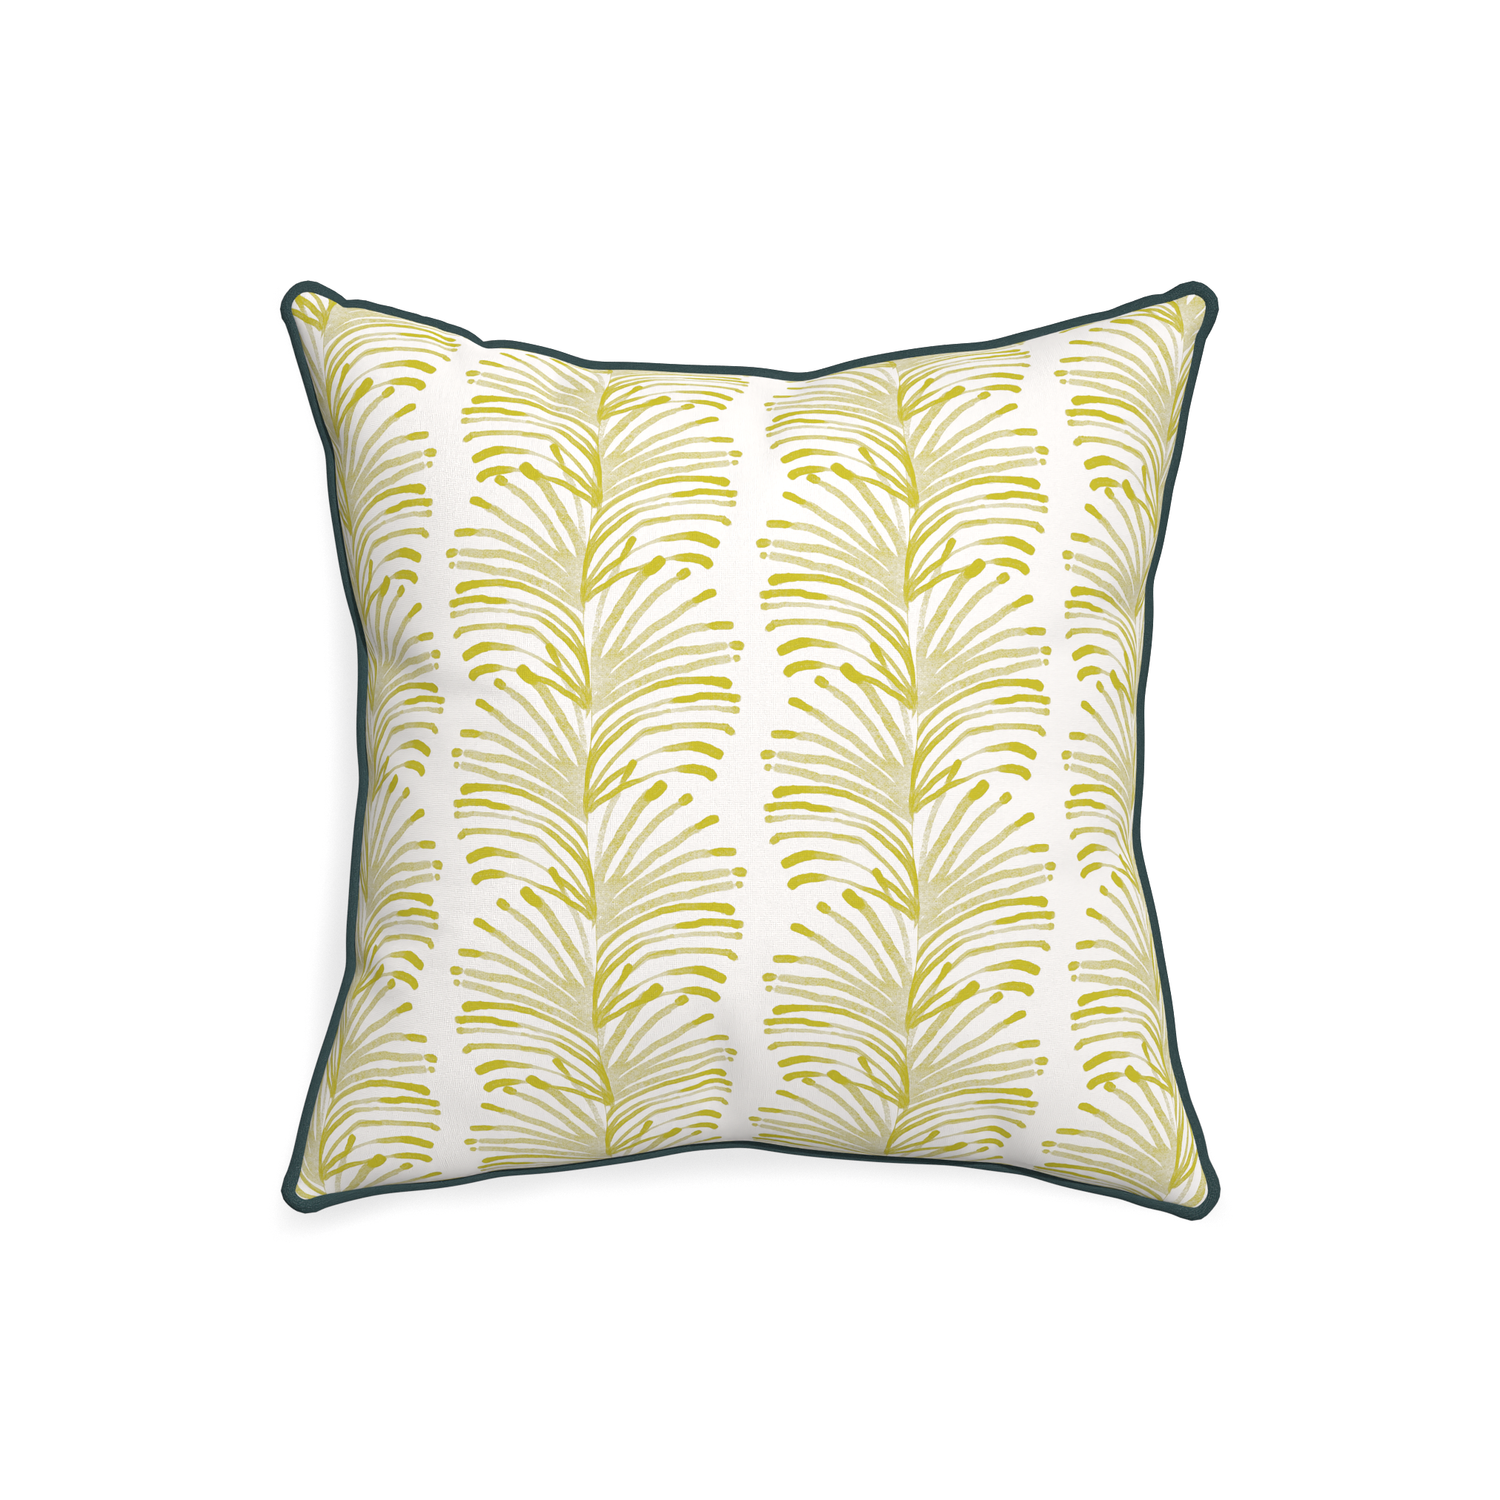 20-square emma chartreuse custom yellow stripe chartreusepillow with p piping on white background